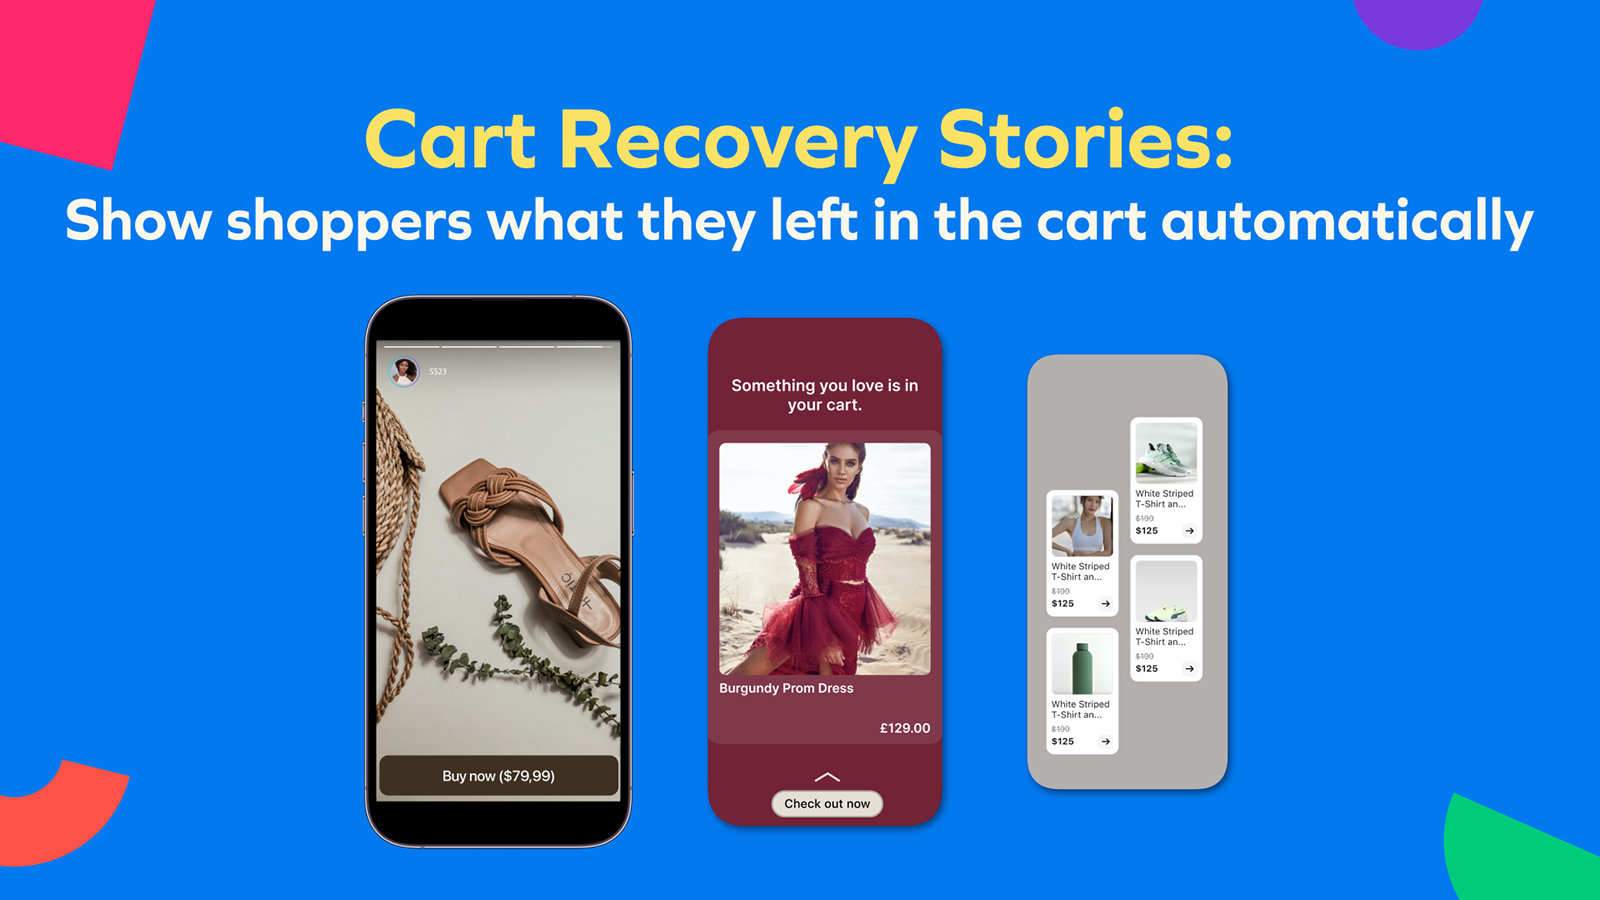 This image shows the usage of cart recovery stories